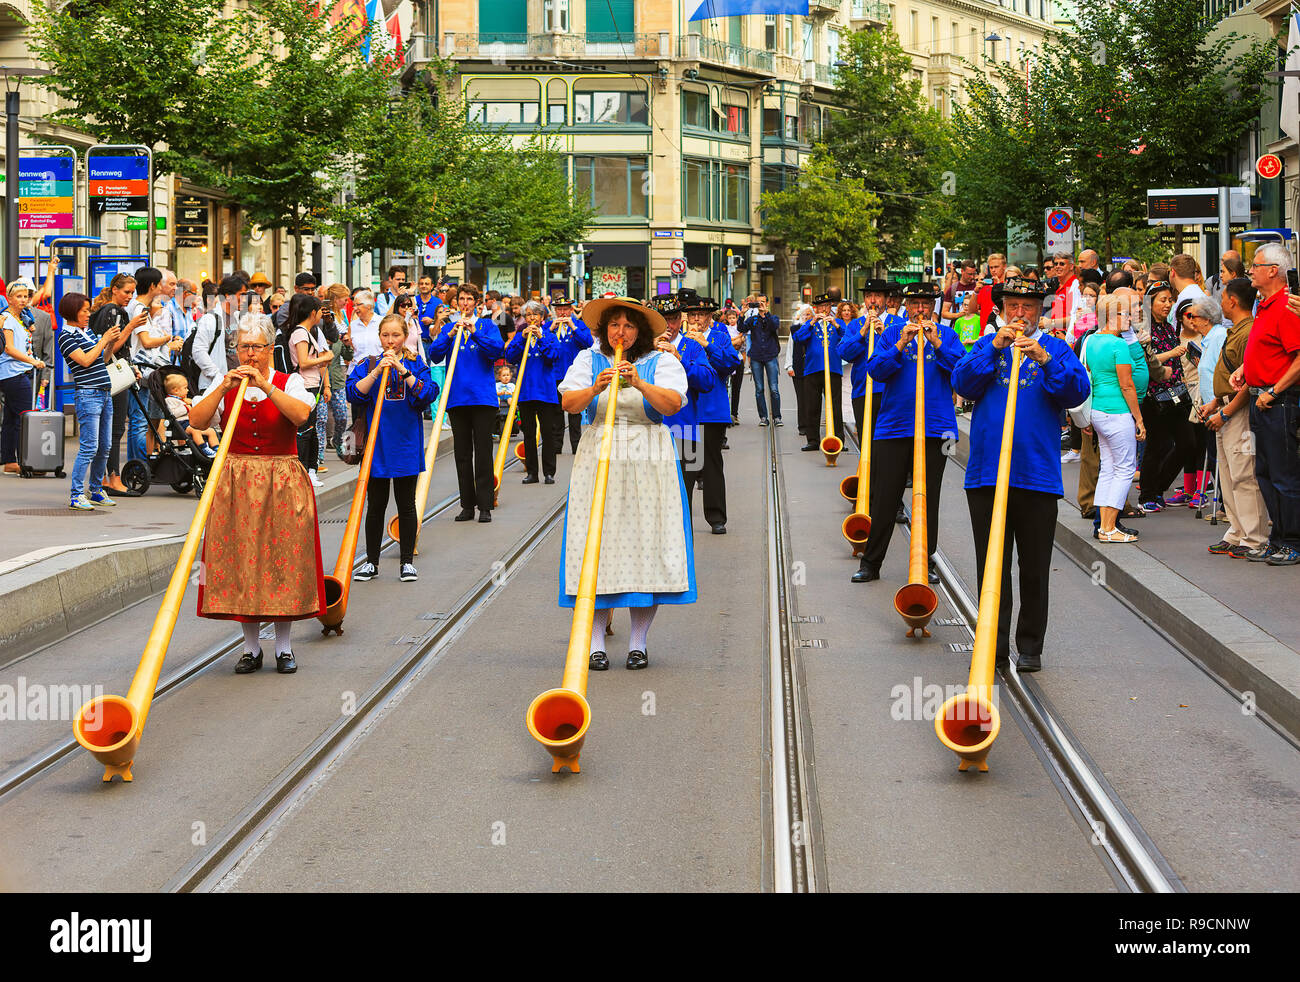 Zurich, Switzerland - August 1, 2016: participants of the parade devoted to the Swiss National Day passing along Bahnhofstrasse street. The Swiss Nati Stock Photo